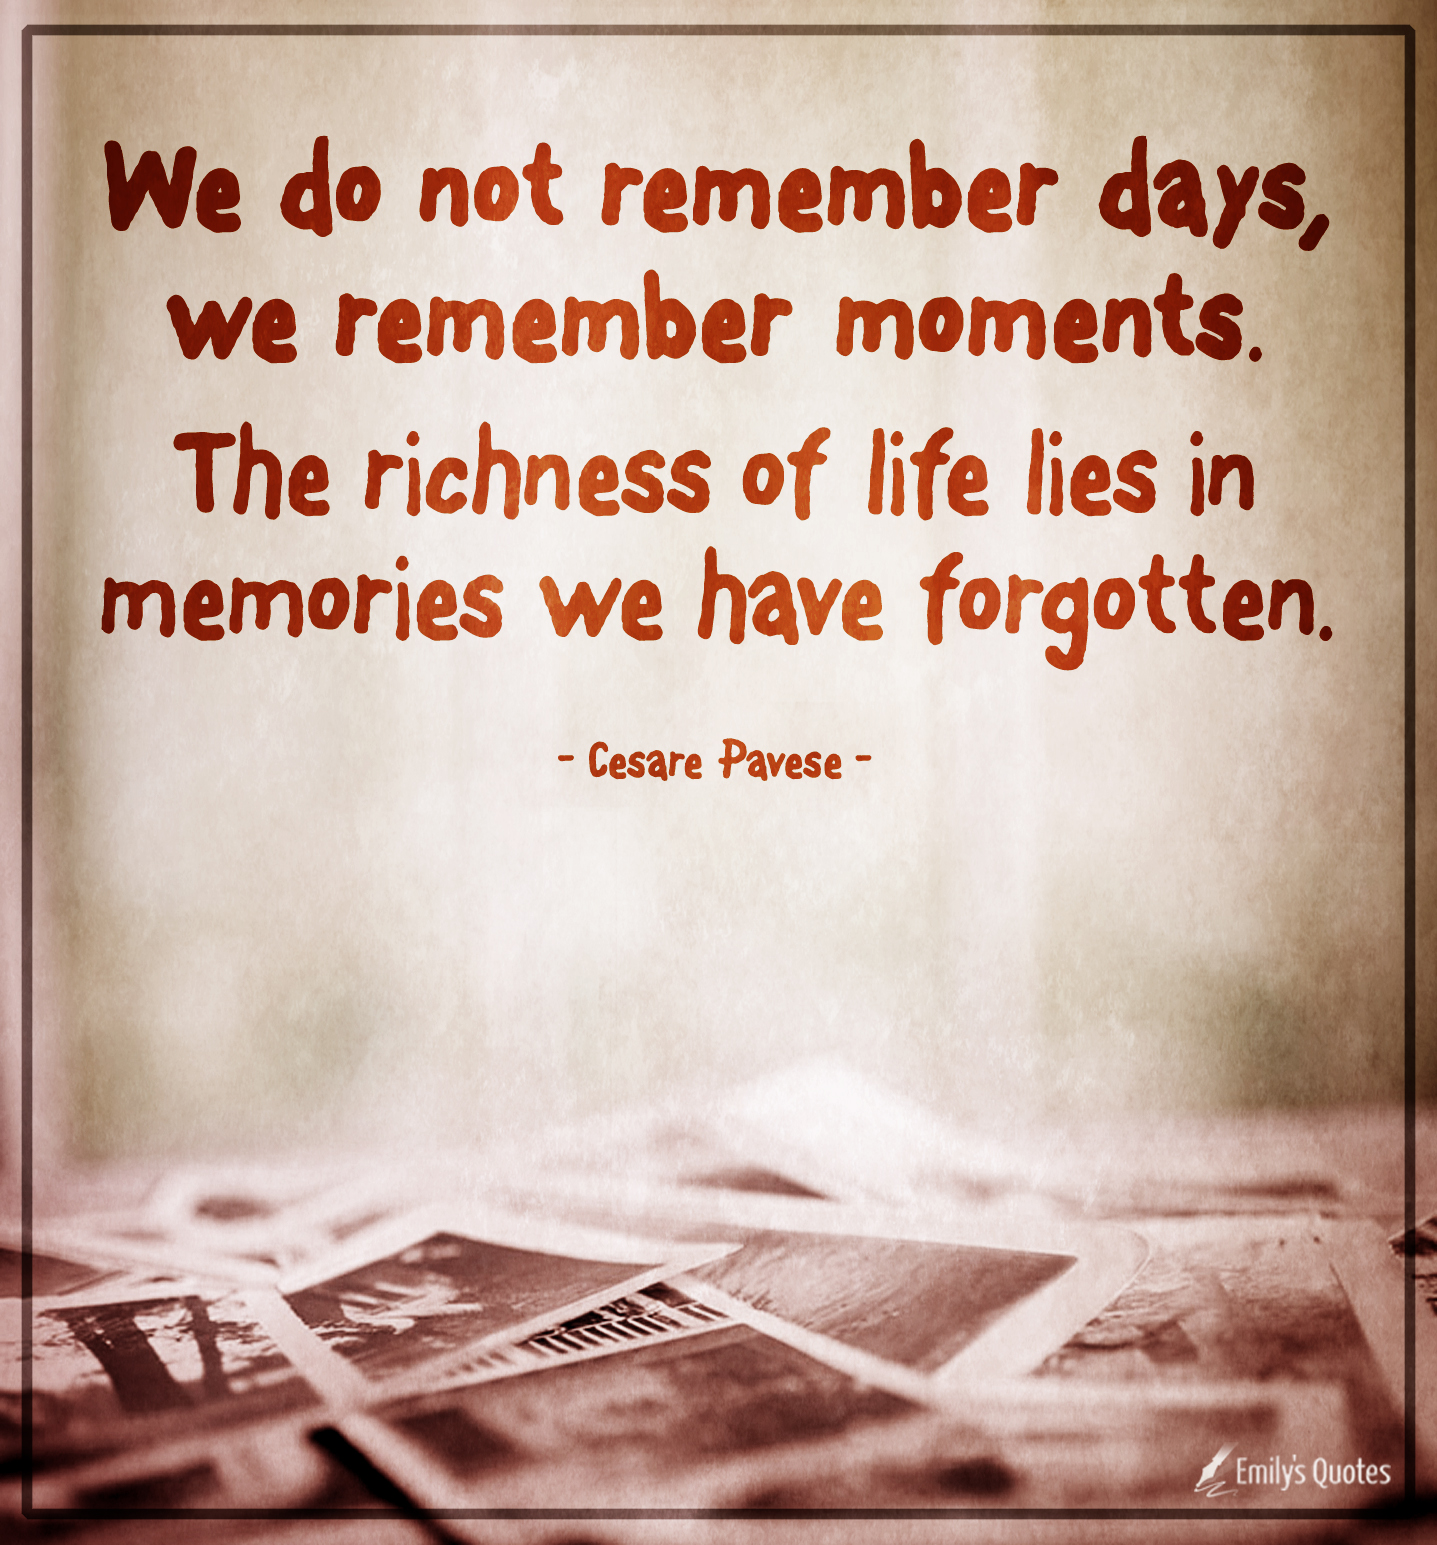 We do not remember days, we remember moments. The richness of life lies in